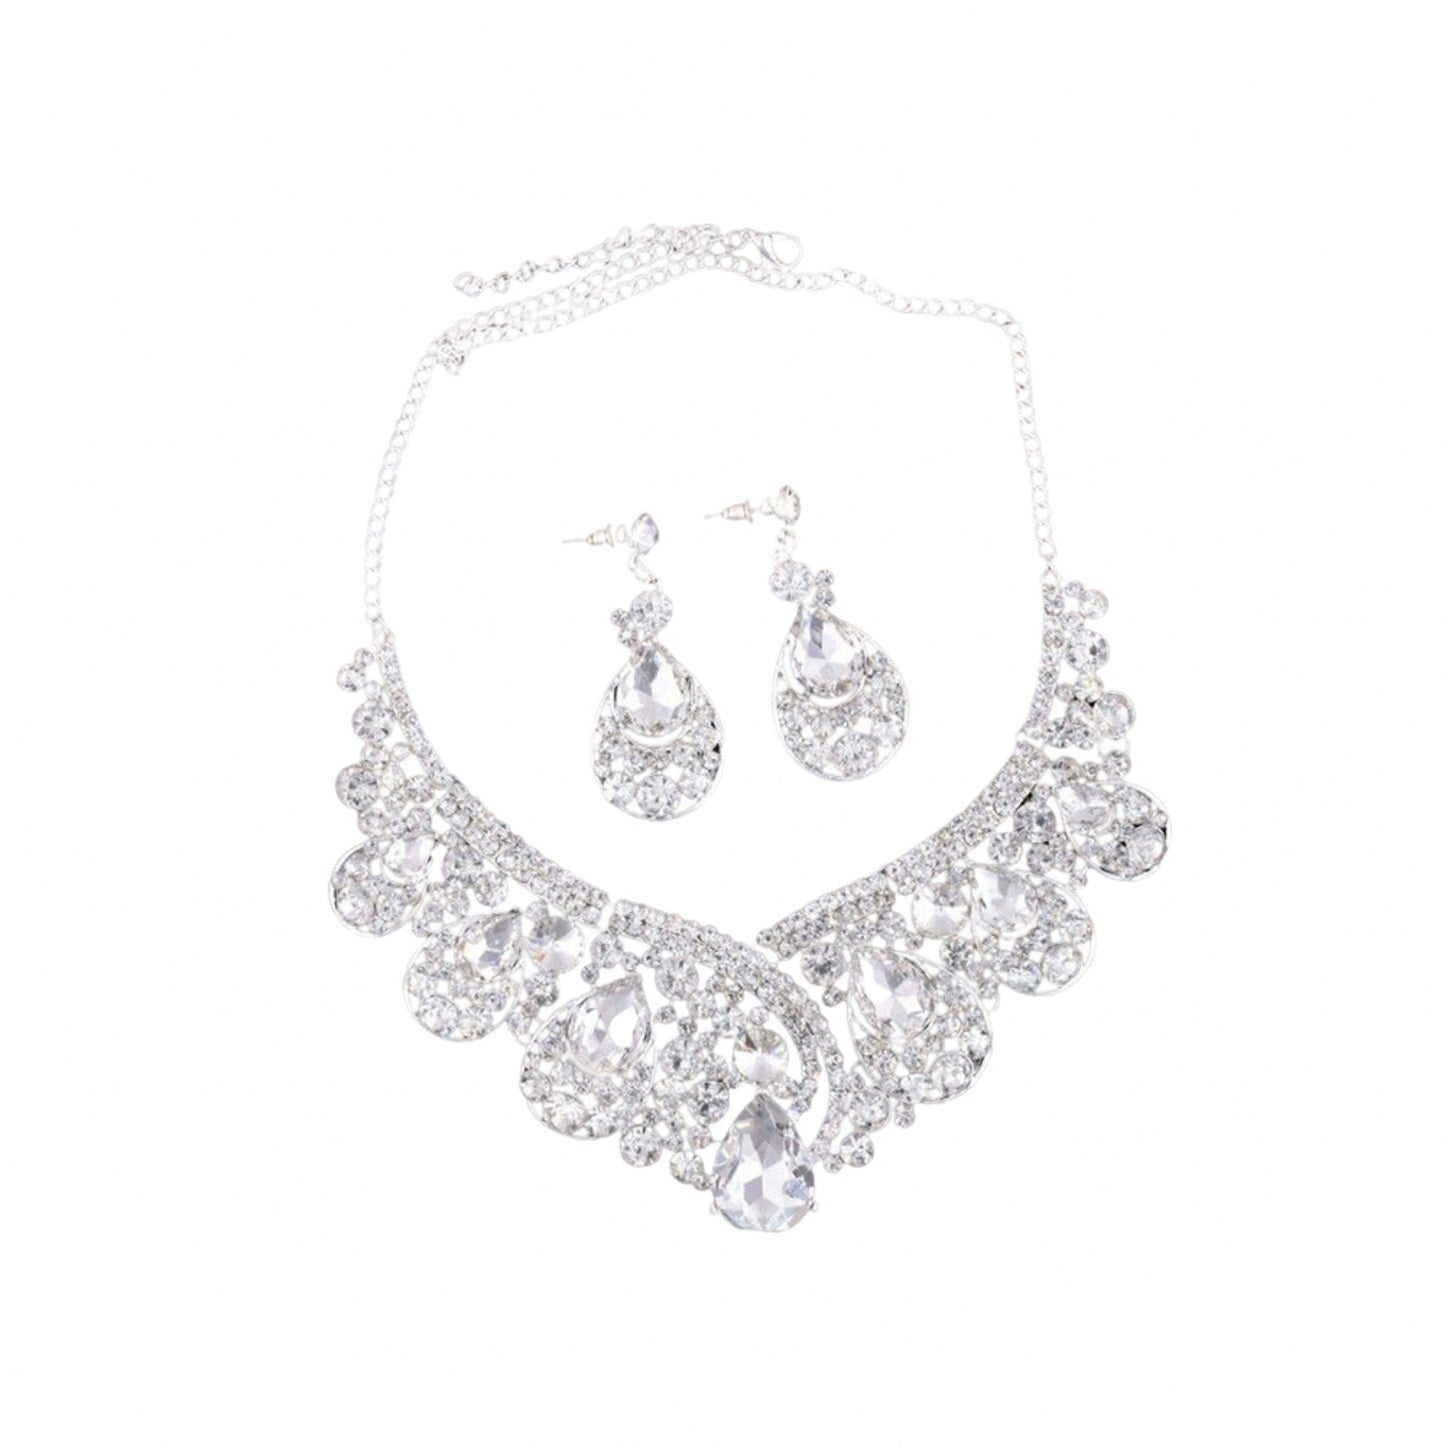 Crystal Necklace and Earrings Jewelry Set Gifts fit with Wedding Dress